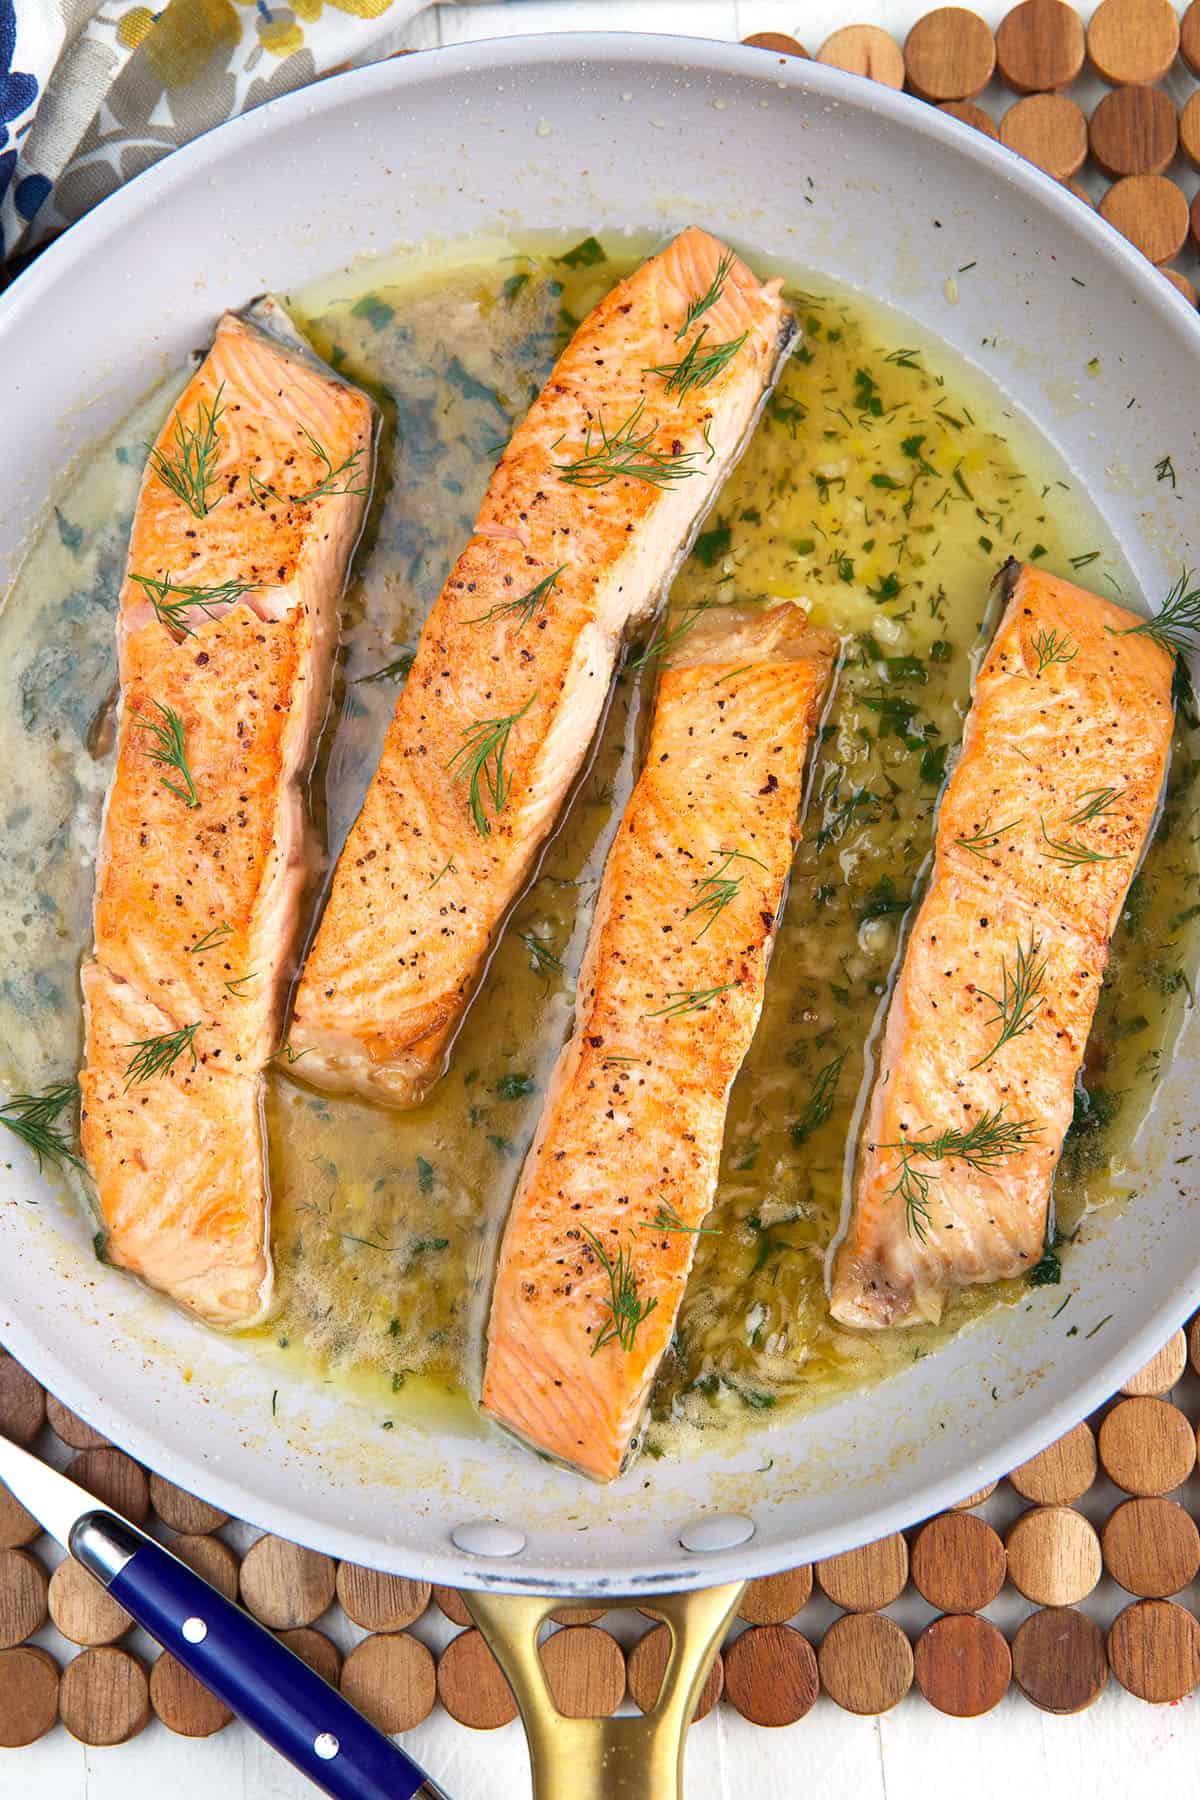 Four salmon filets are being cooked in a skillet. 